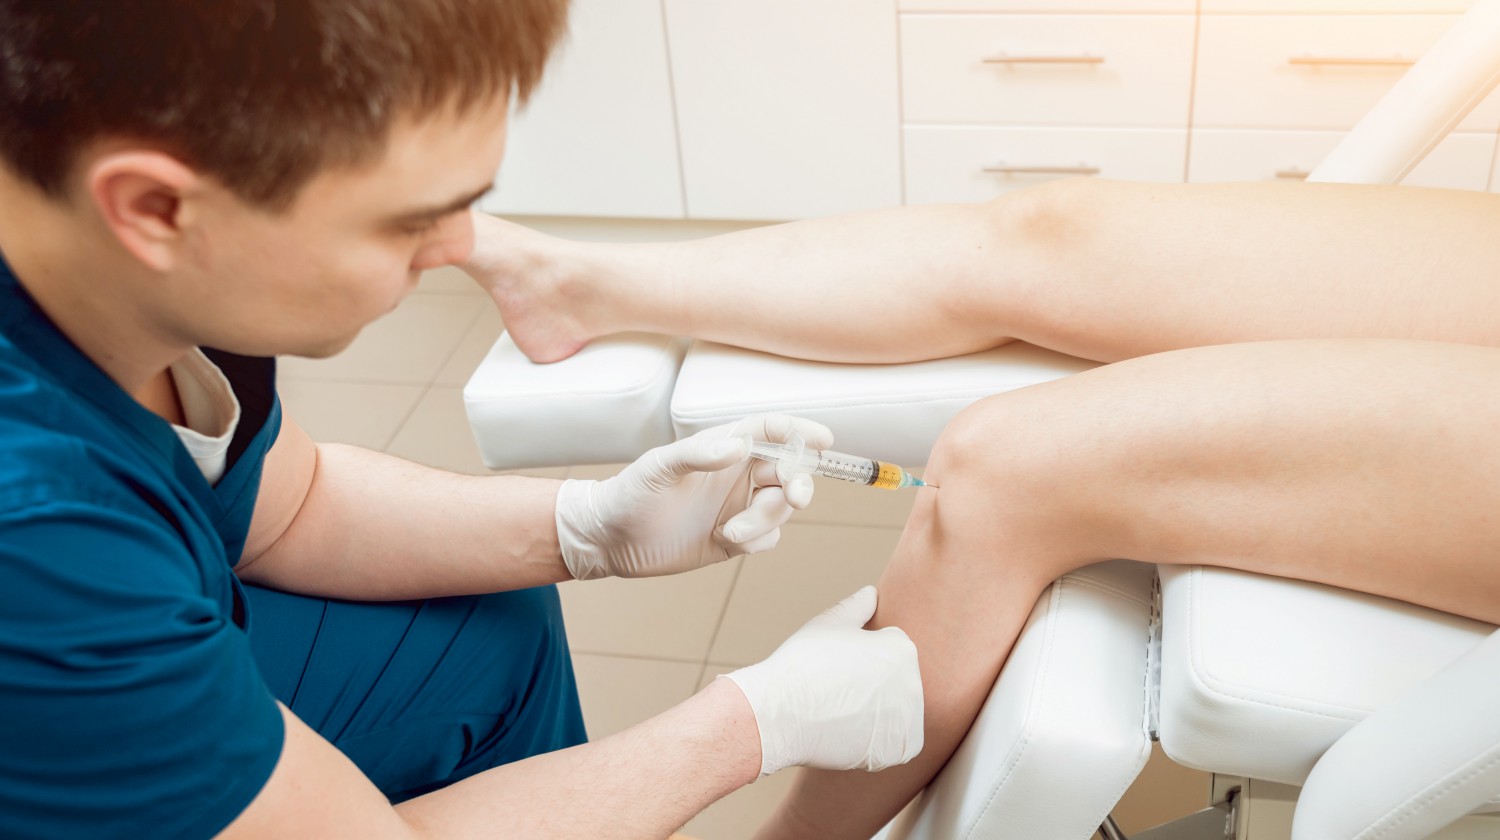 Role of Platelet-Rich Plasma (PRP) injection in knee arthritis